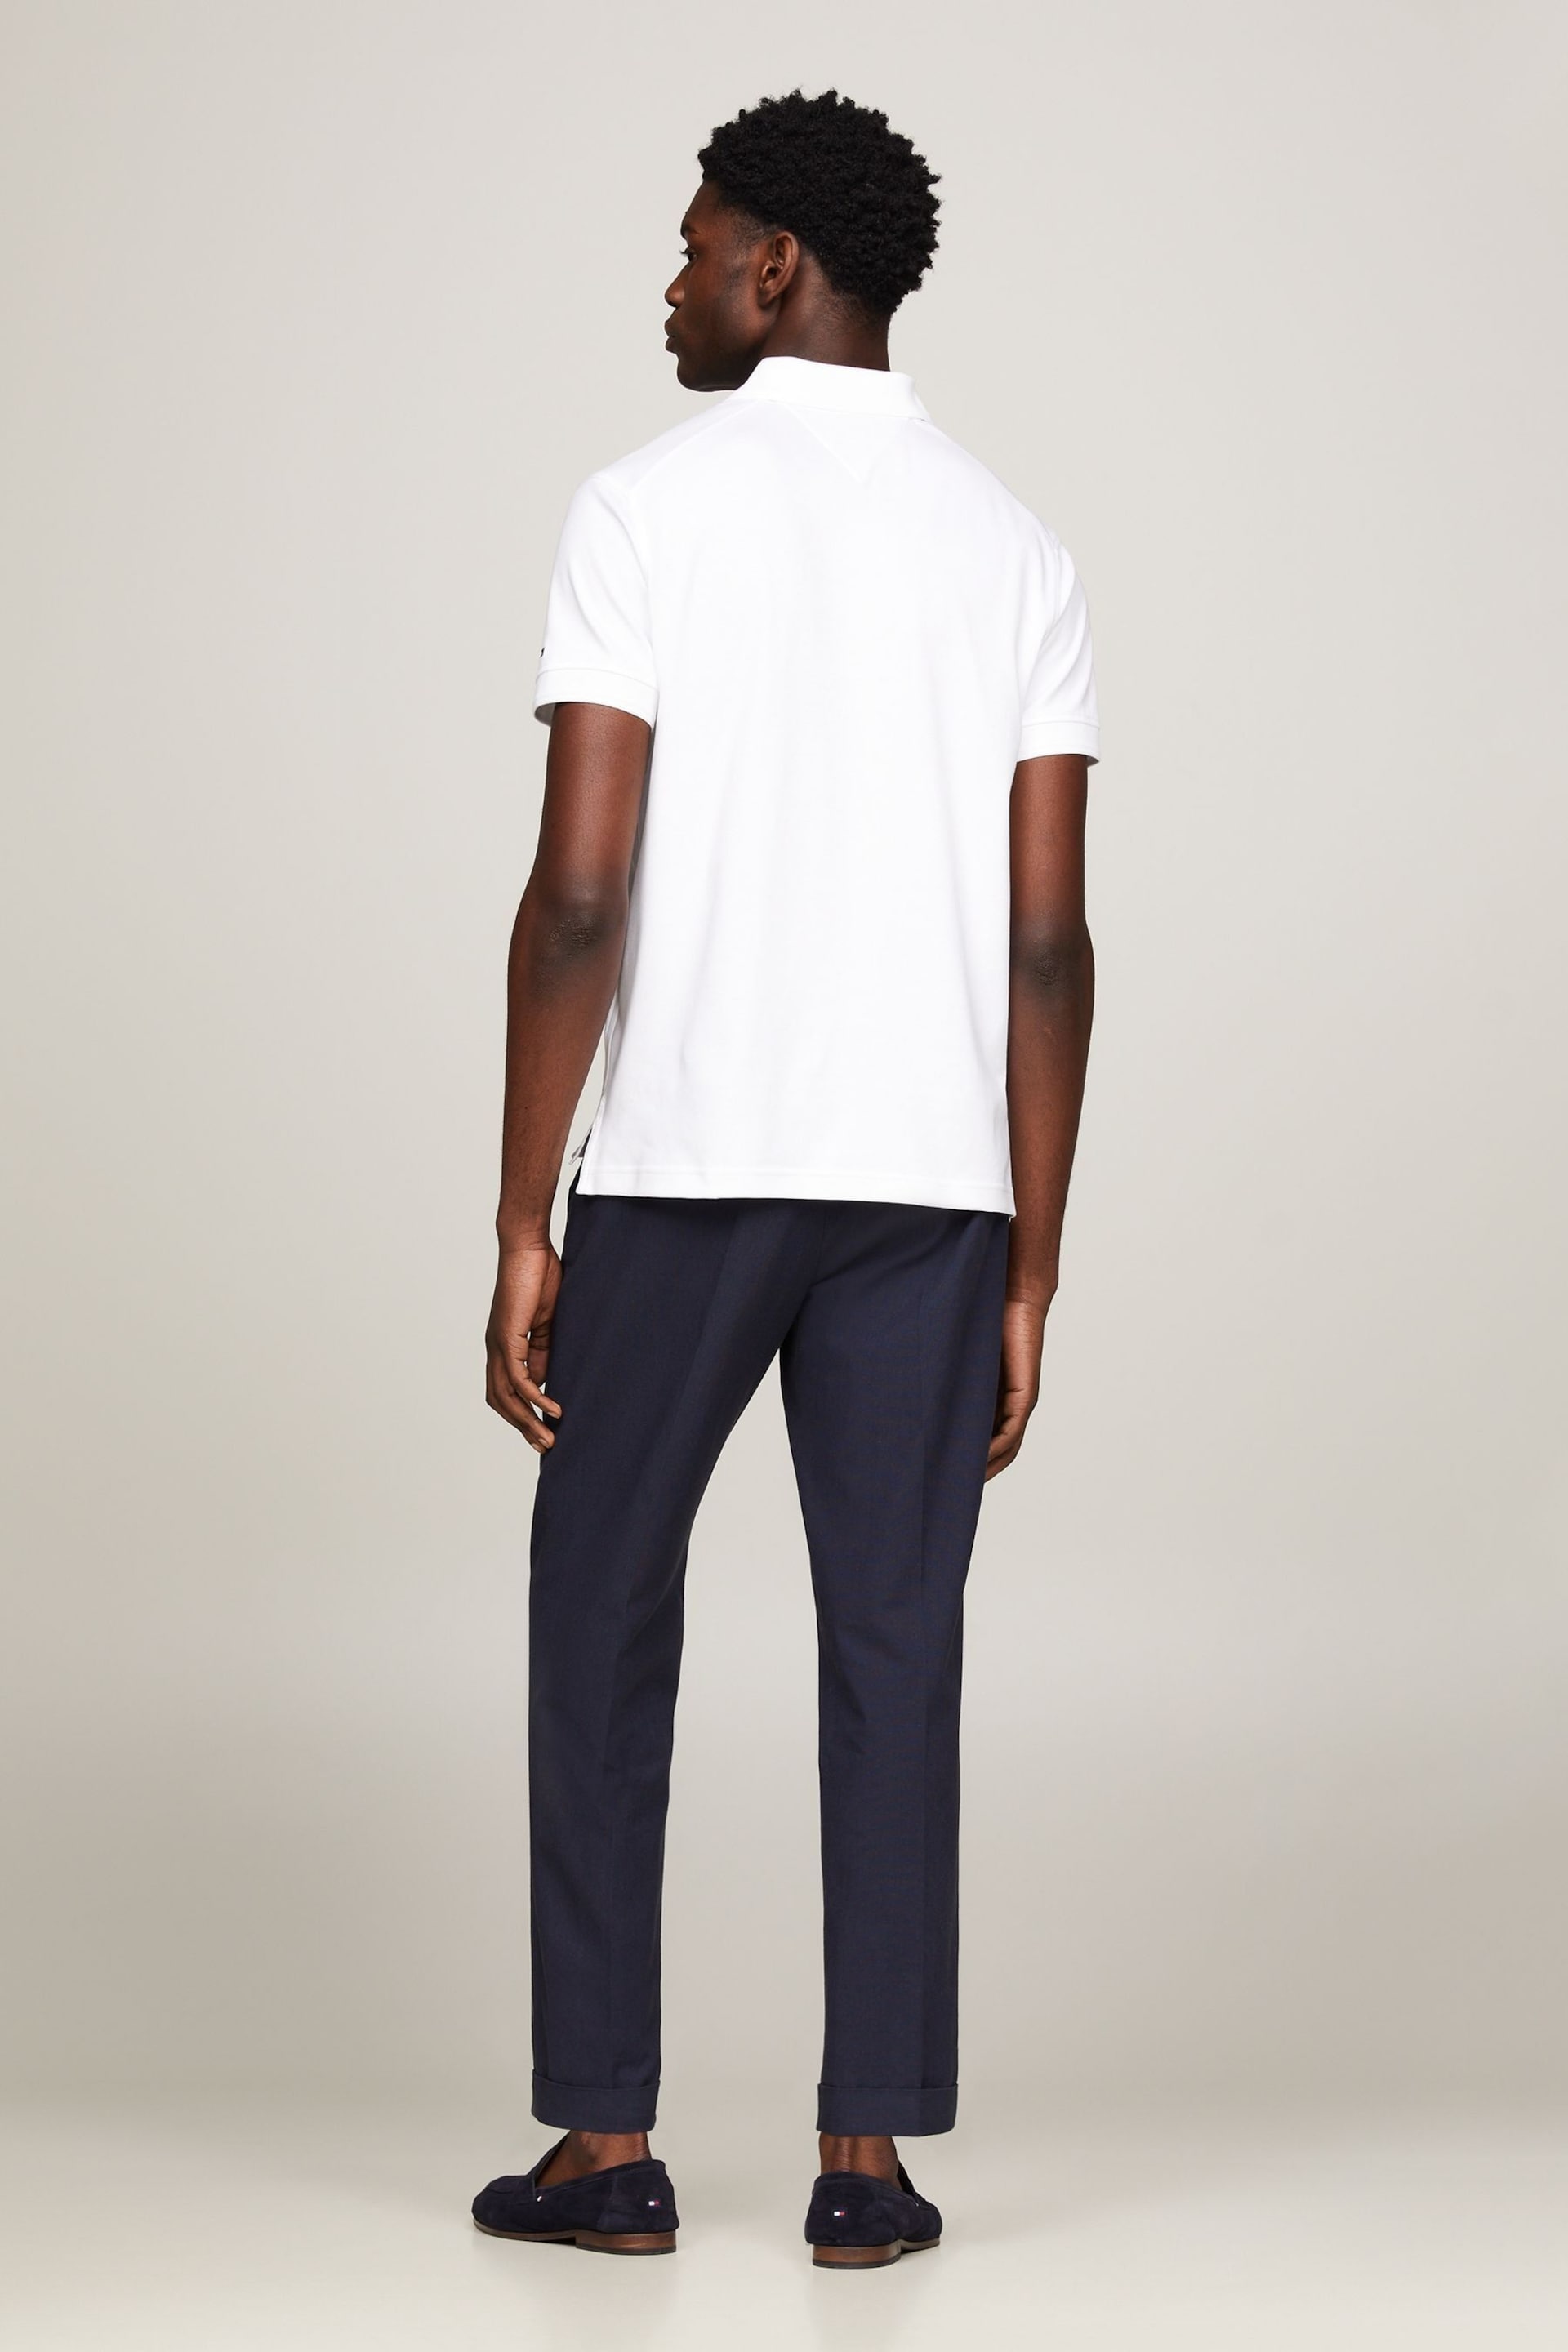 Tommy Hilfiger White Zip Neck Polo - Image 2 of 2